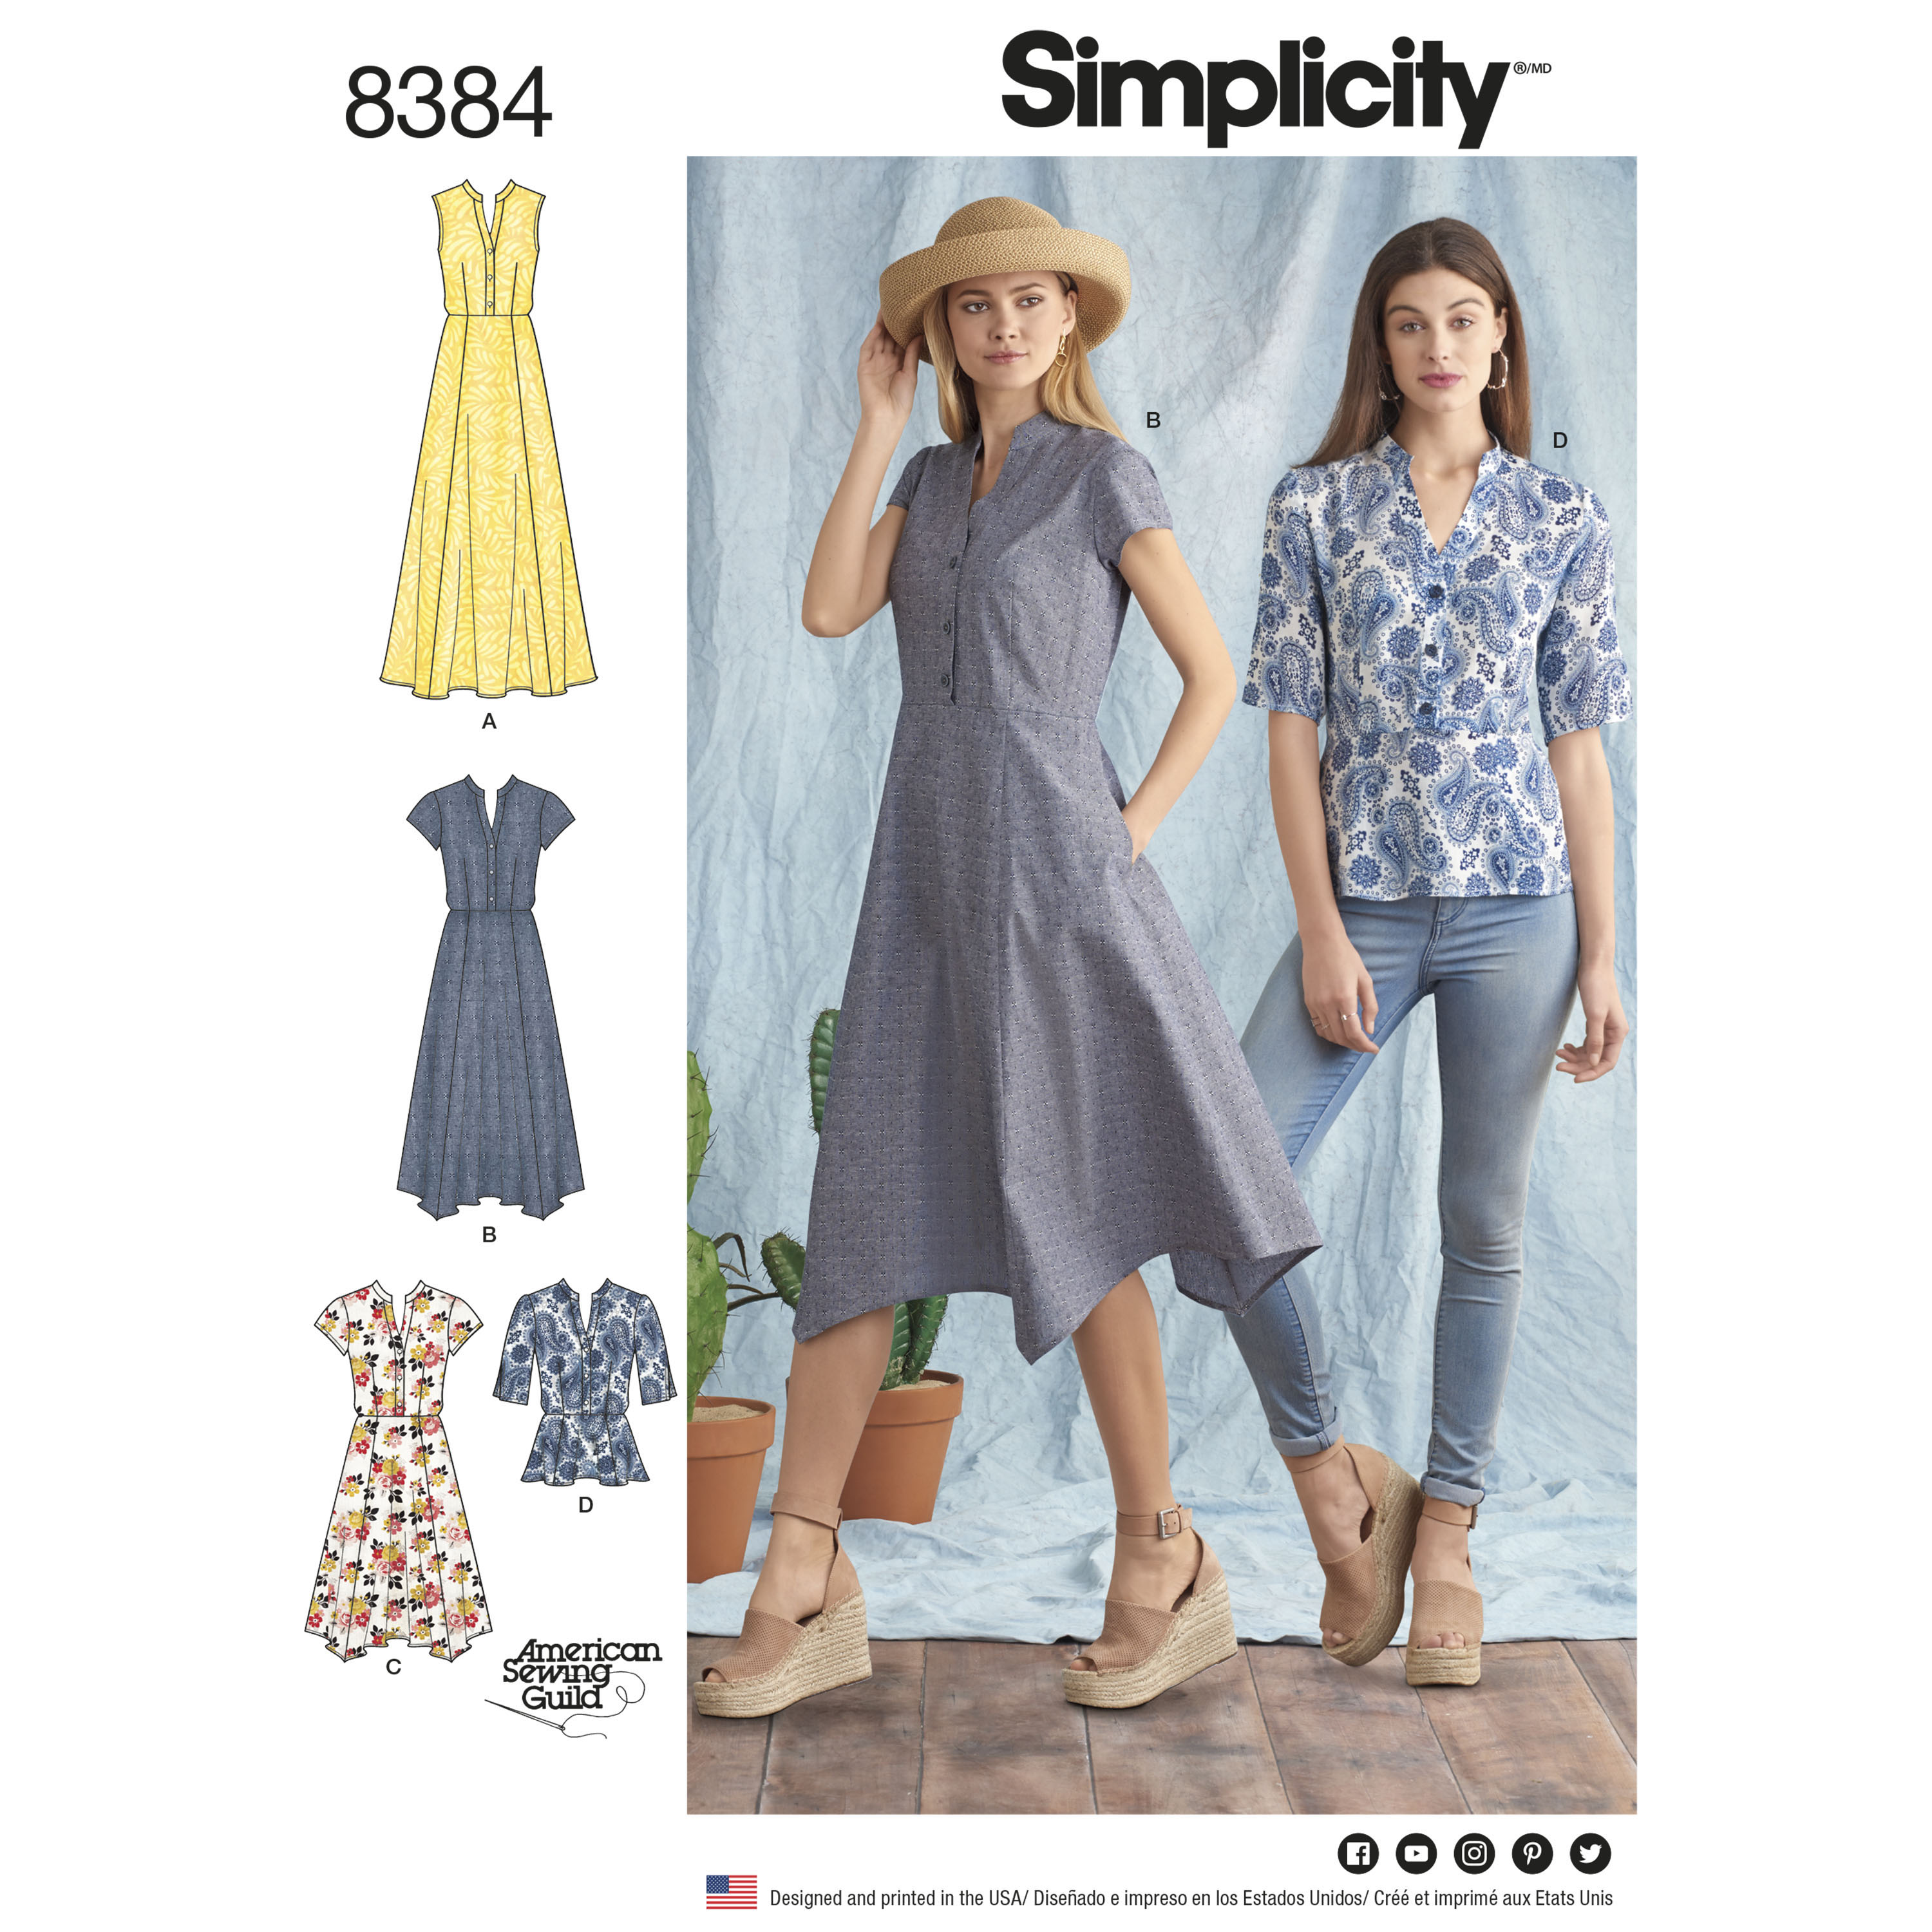 Simplicity 8384 Misses' Dress with Length Variations and Top